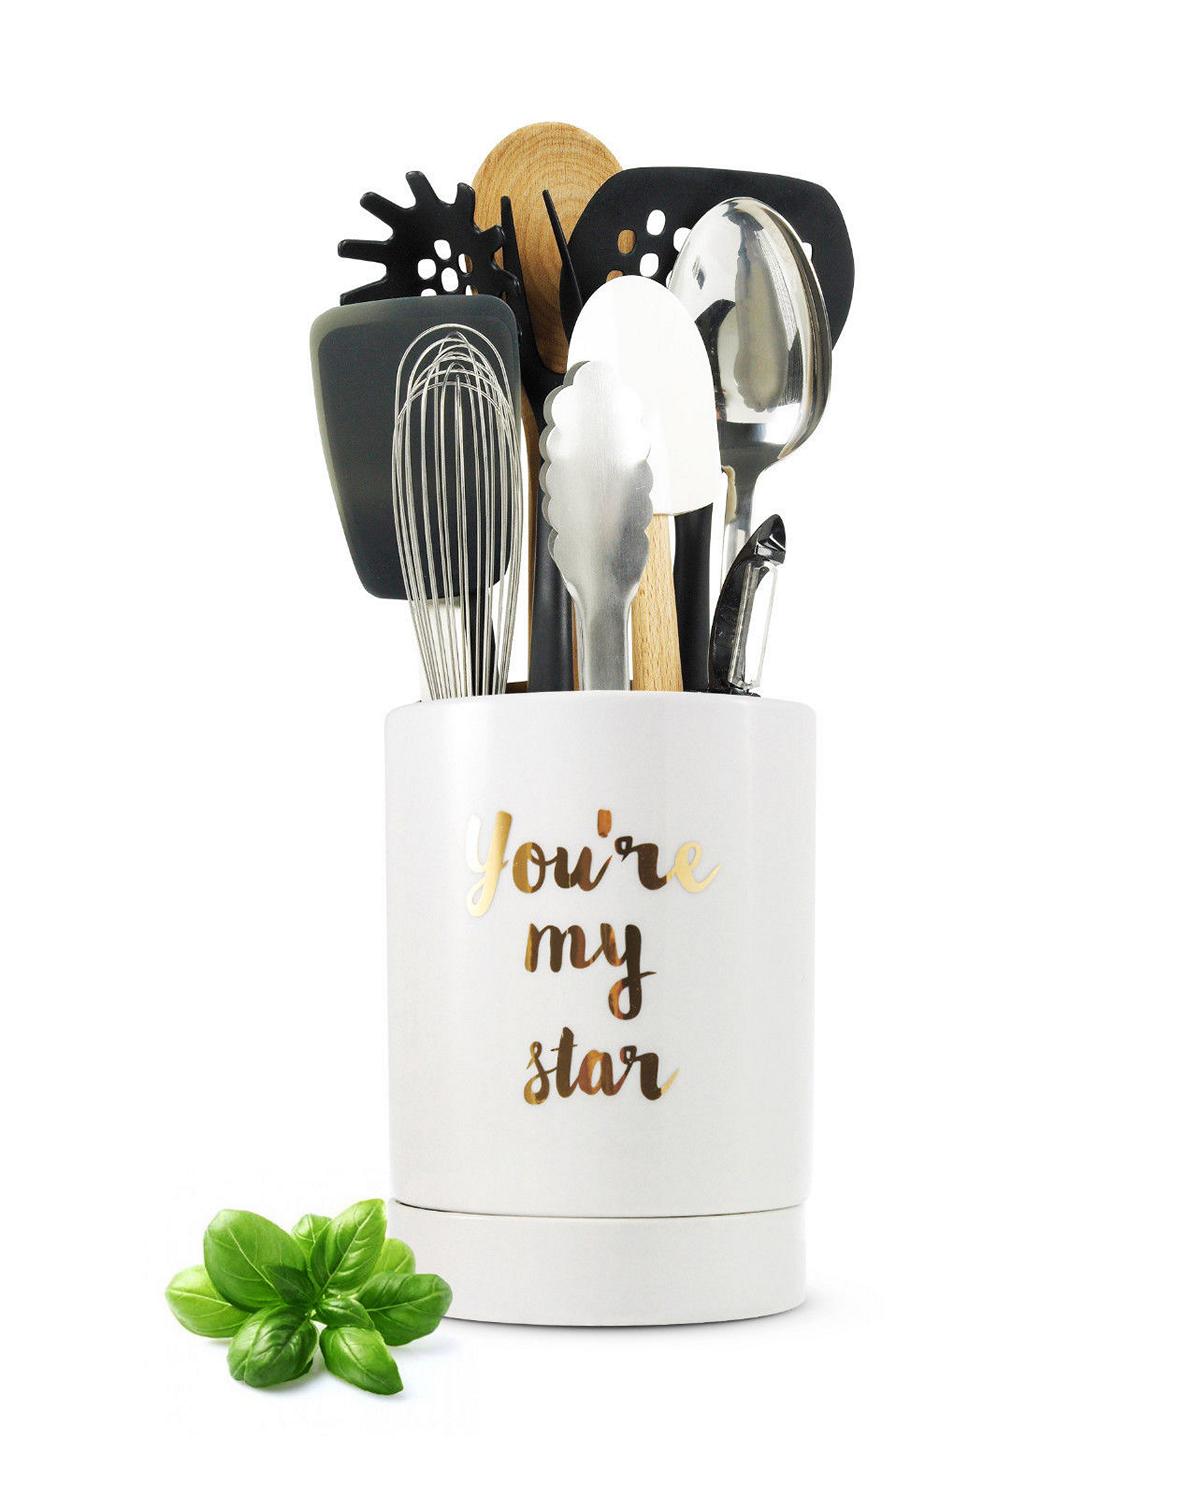 Cutlery holder with drainer made of porcelain cutlery basket cutlery container cutlery drainer cutlery stand drainer